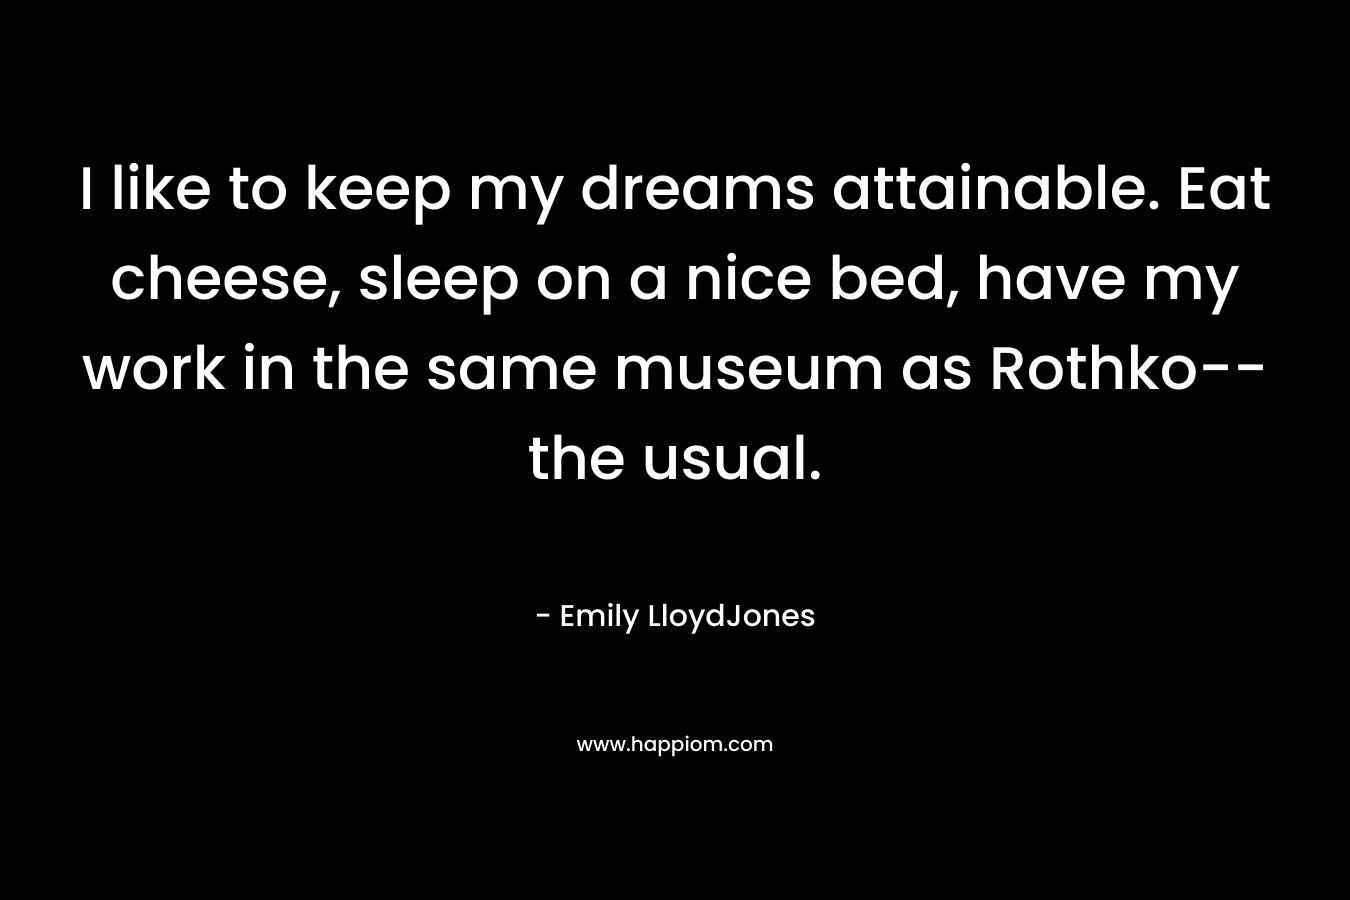 I like to keep my dreams attainable. Eat cheese, sleep on a nice bed, have my work in the same museum as Rothko–the usual. – Emily LloydJones